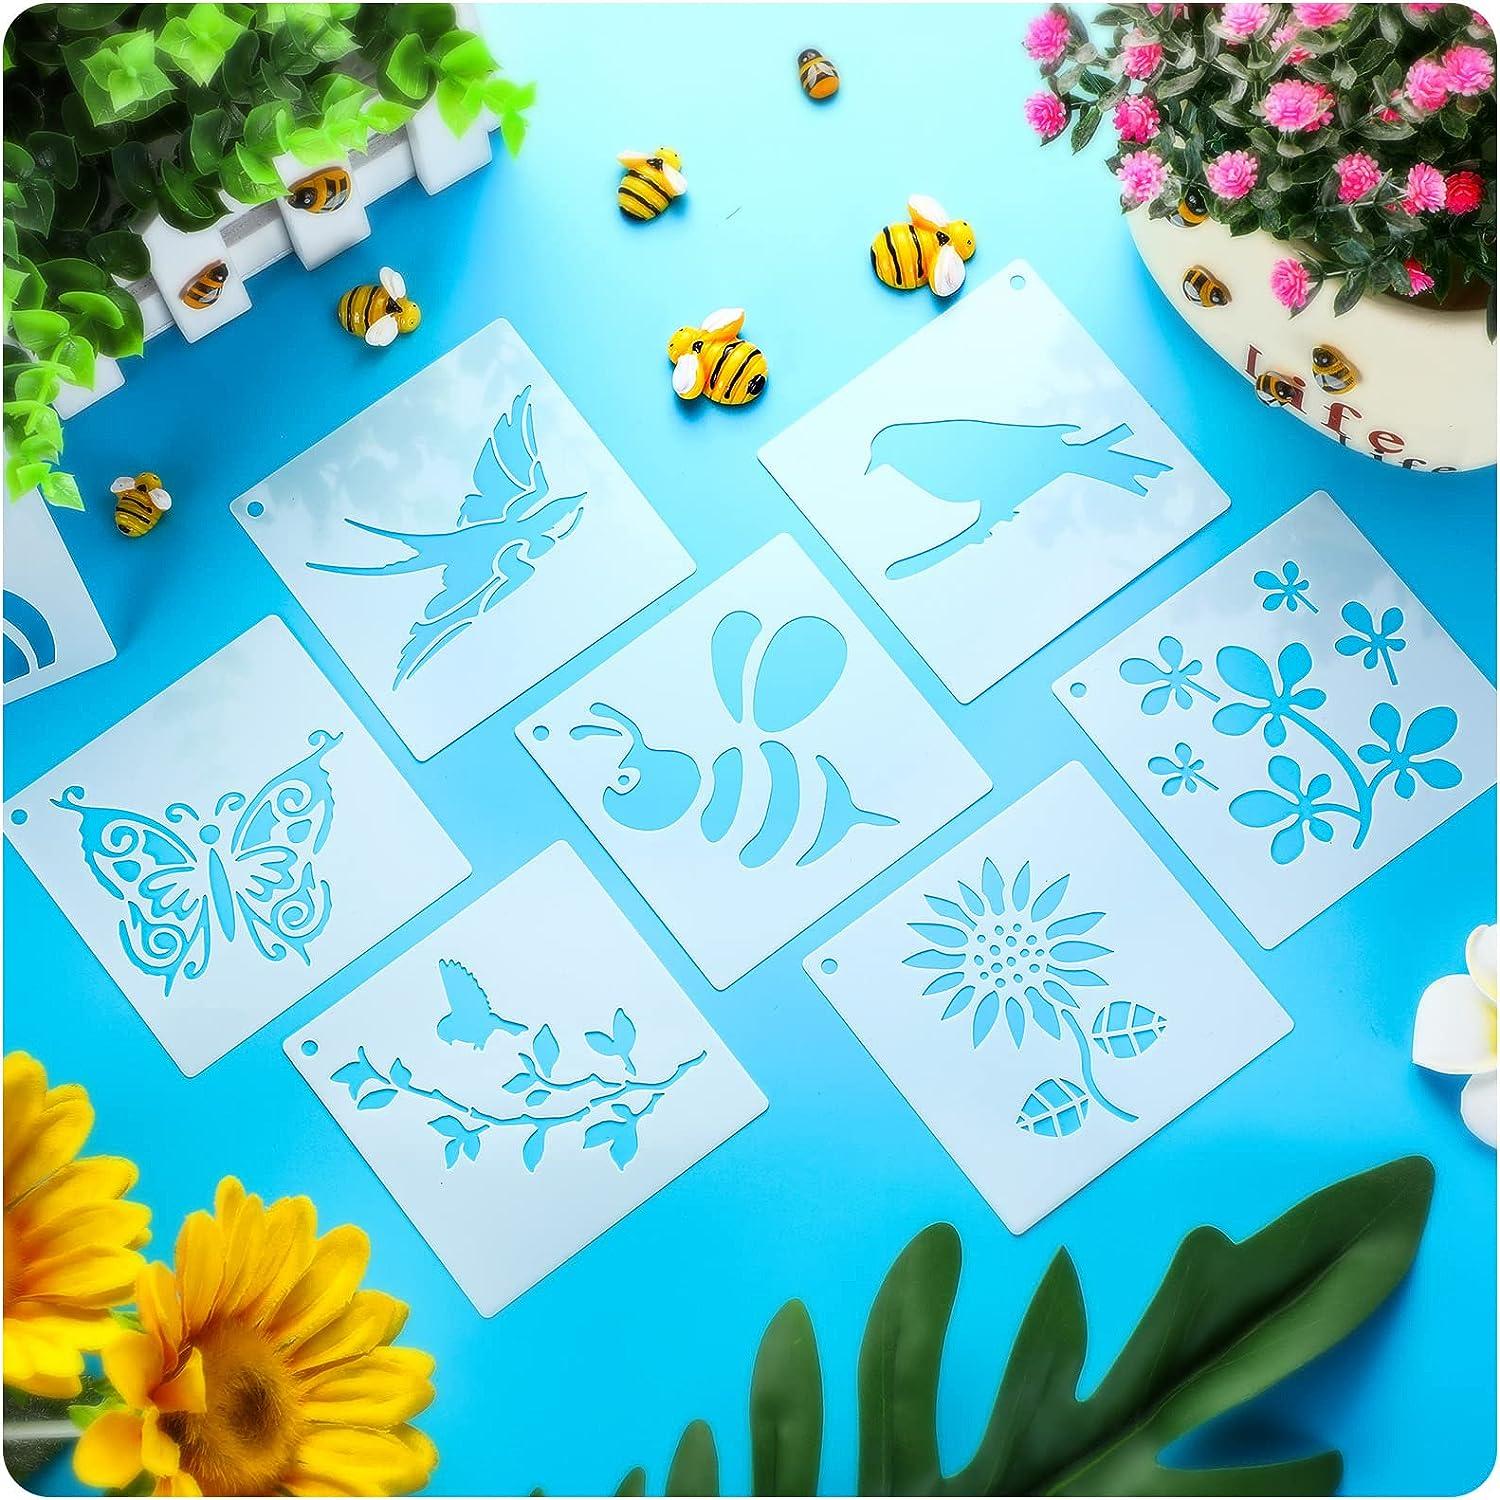 60 Pieces Stencil for Painting Reusable Stencils Wall Stencil DIY Craft  Template Paint Stencils for Painting on Wood Wall Home Decor(Flowering  Plants)